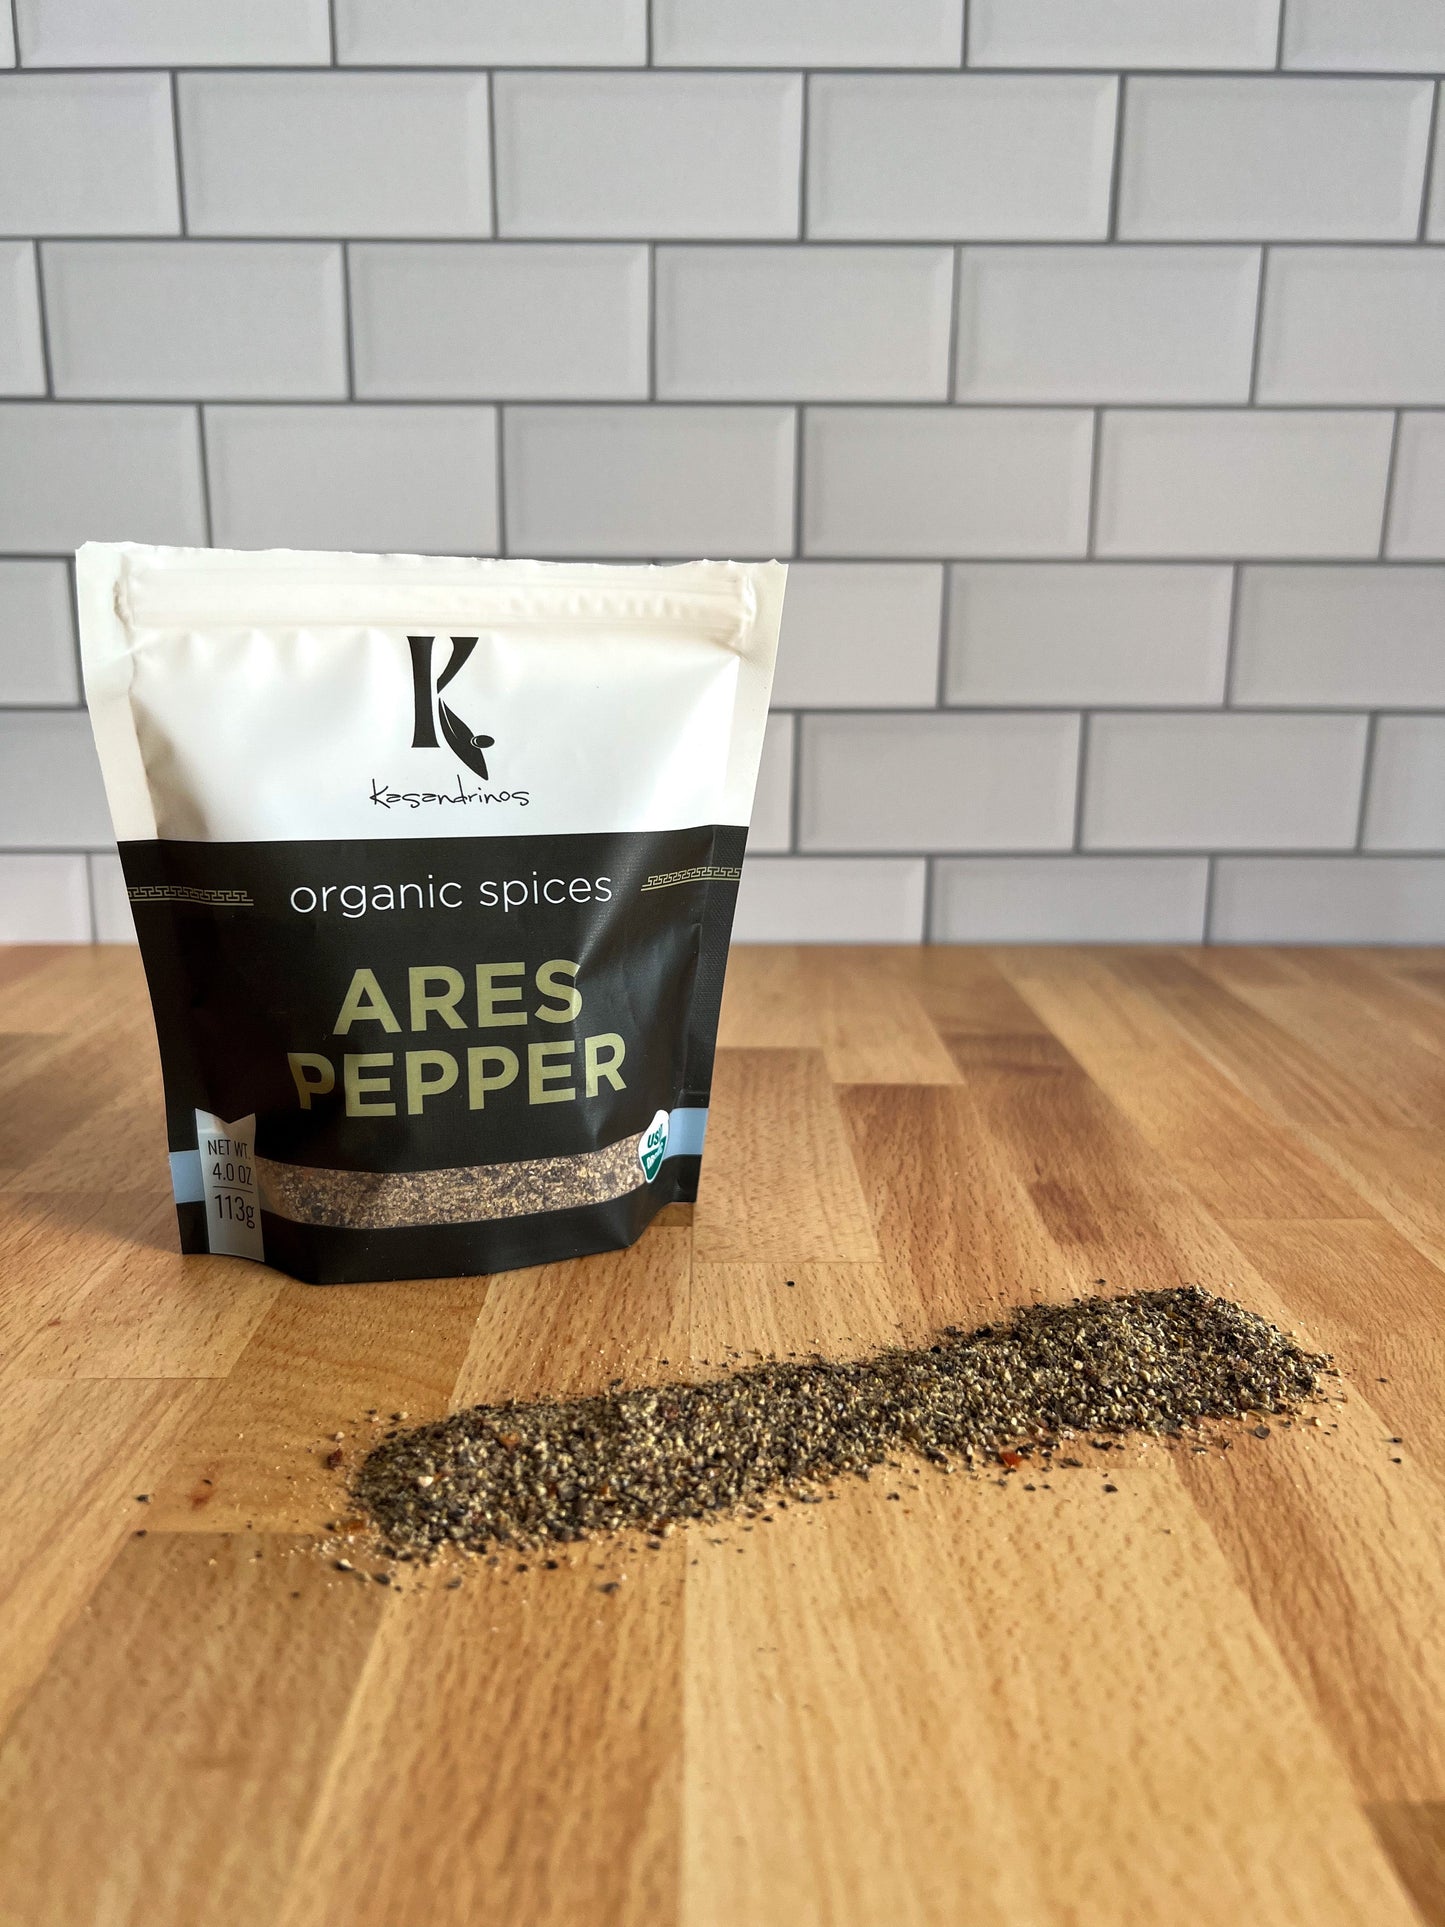 (4) Ares Pepper blend